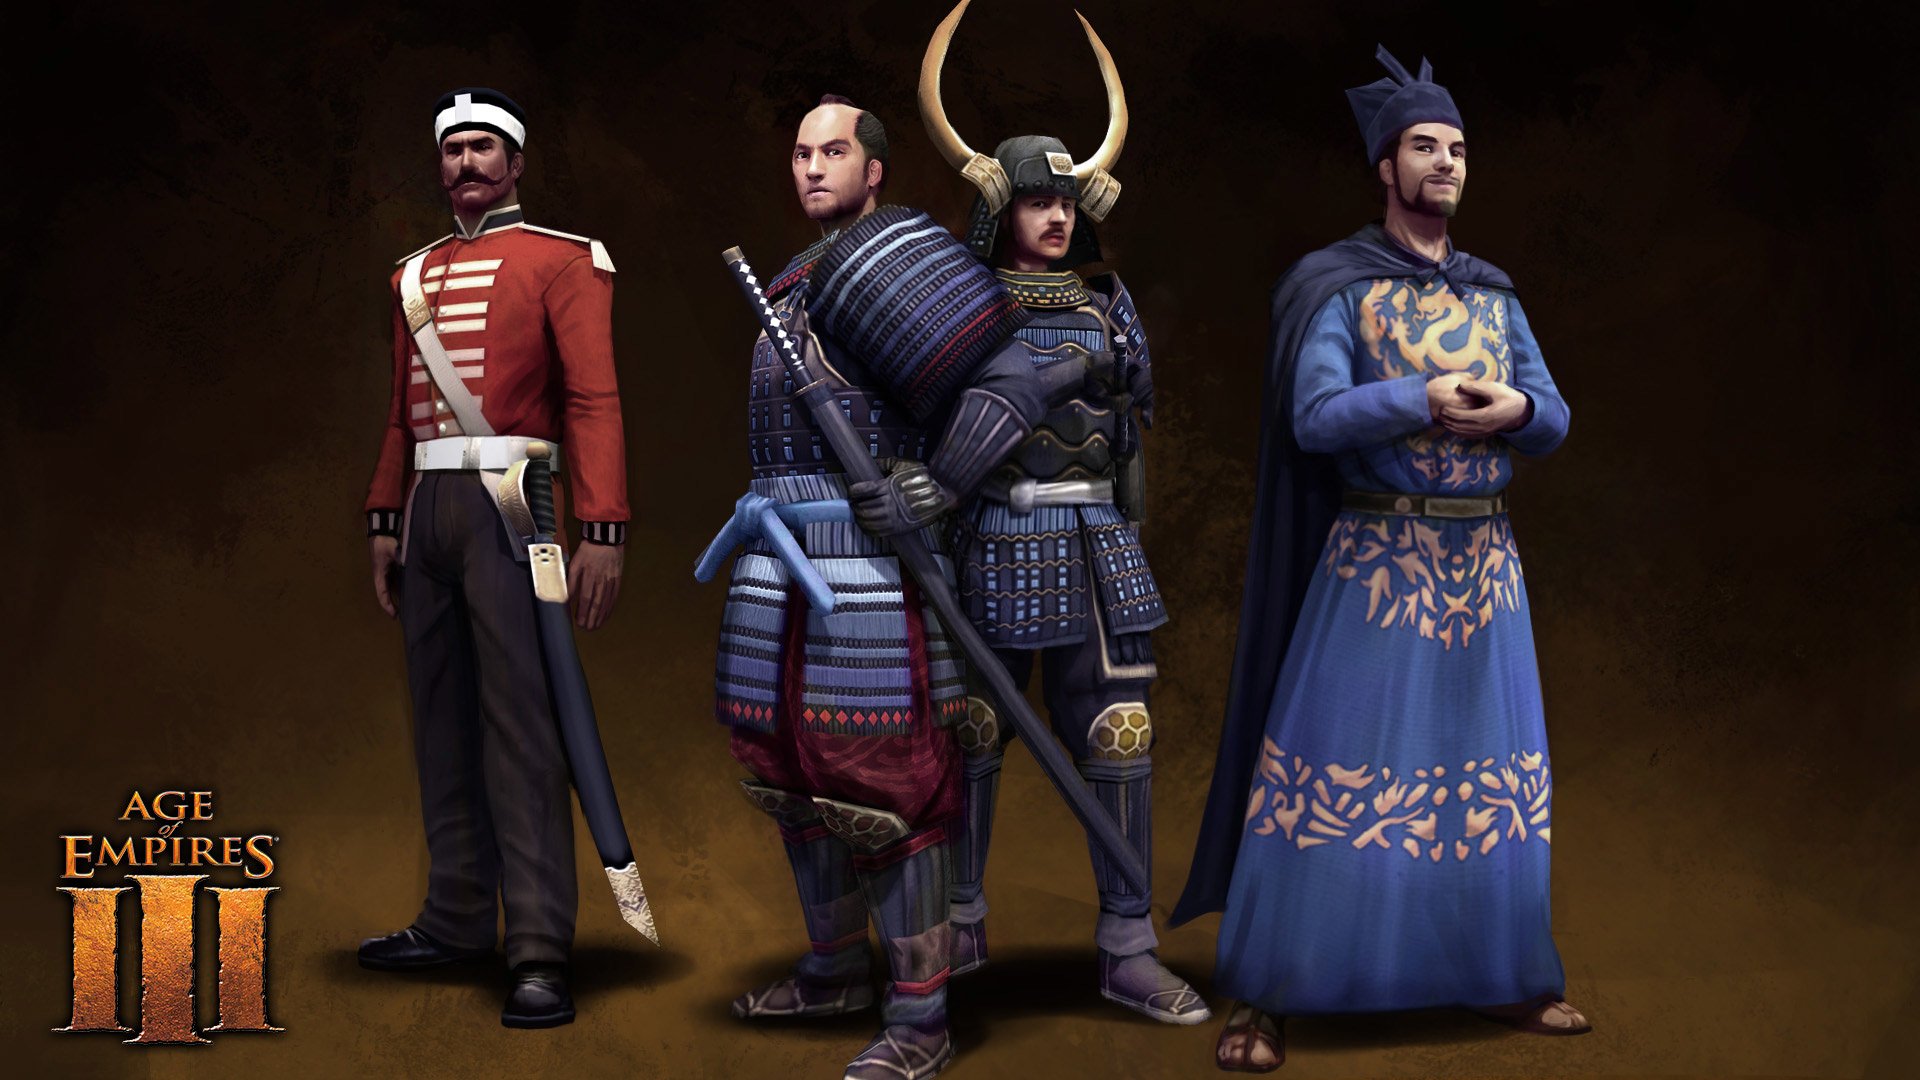 age of empires 3 the asian dynasties